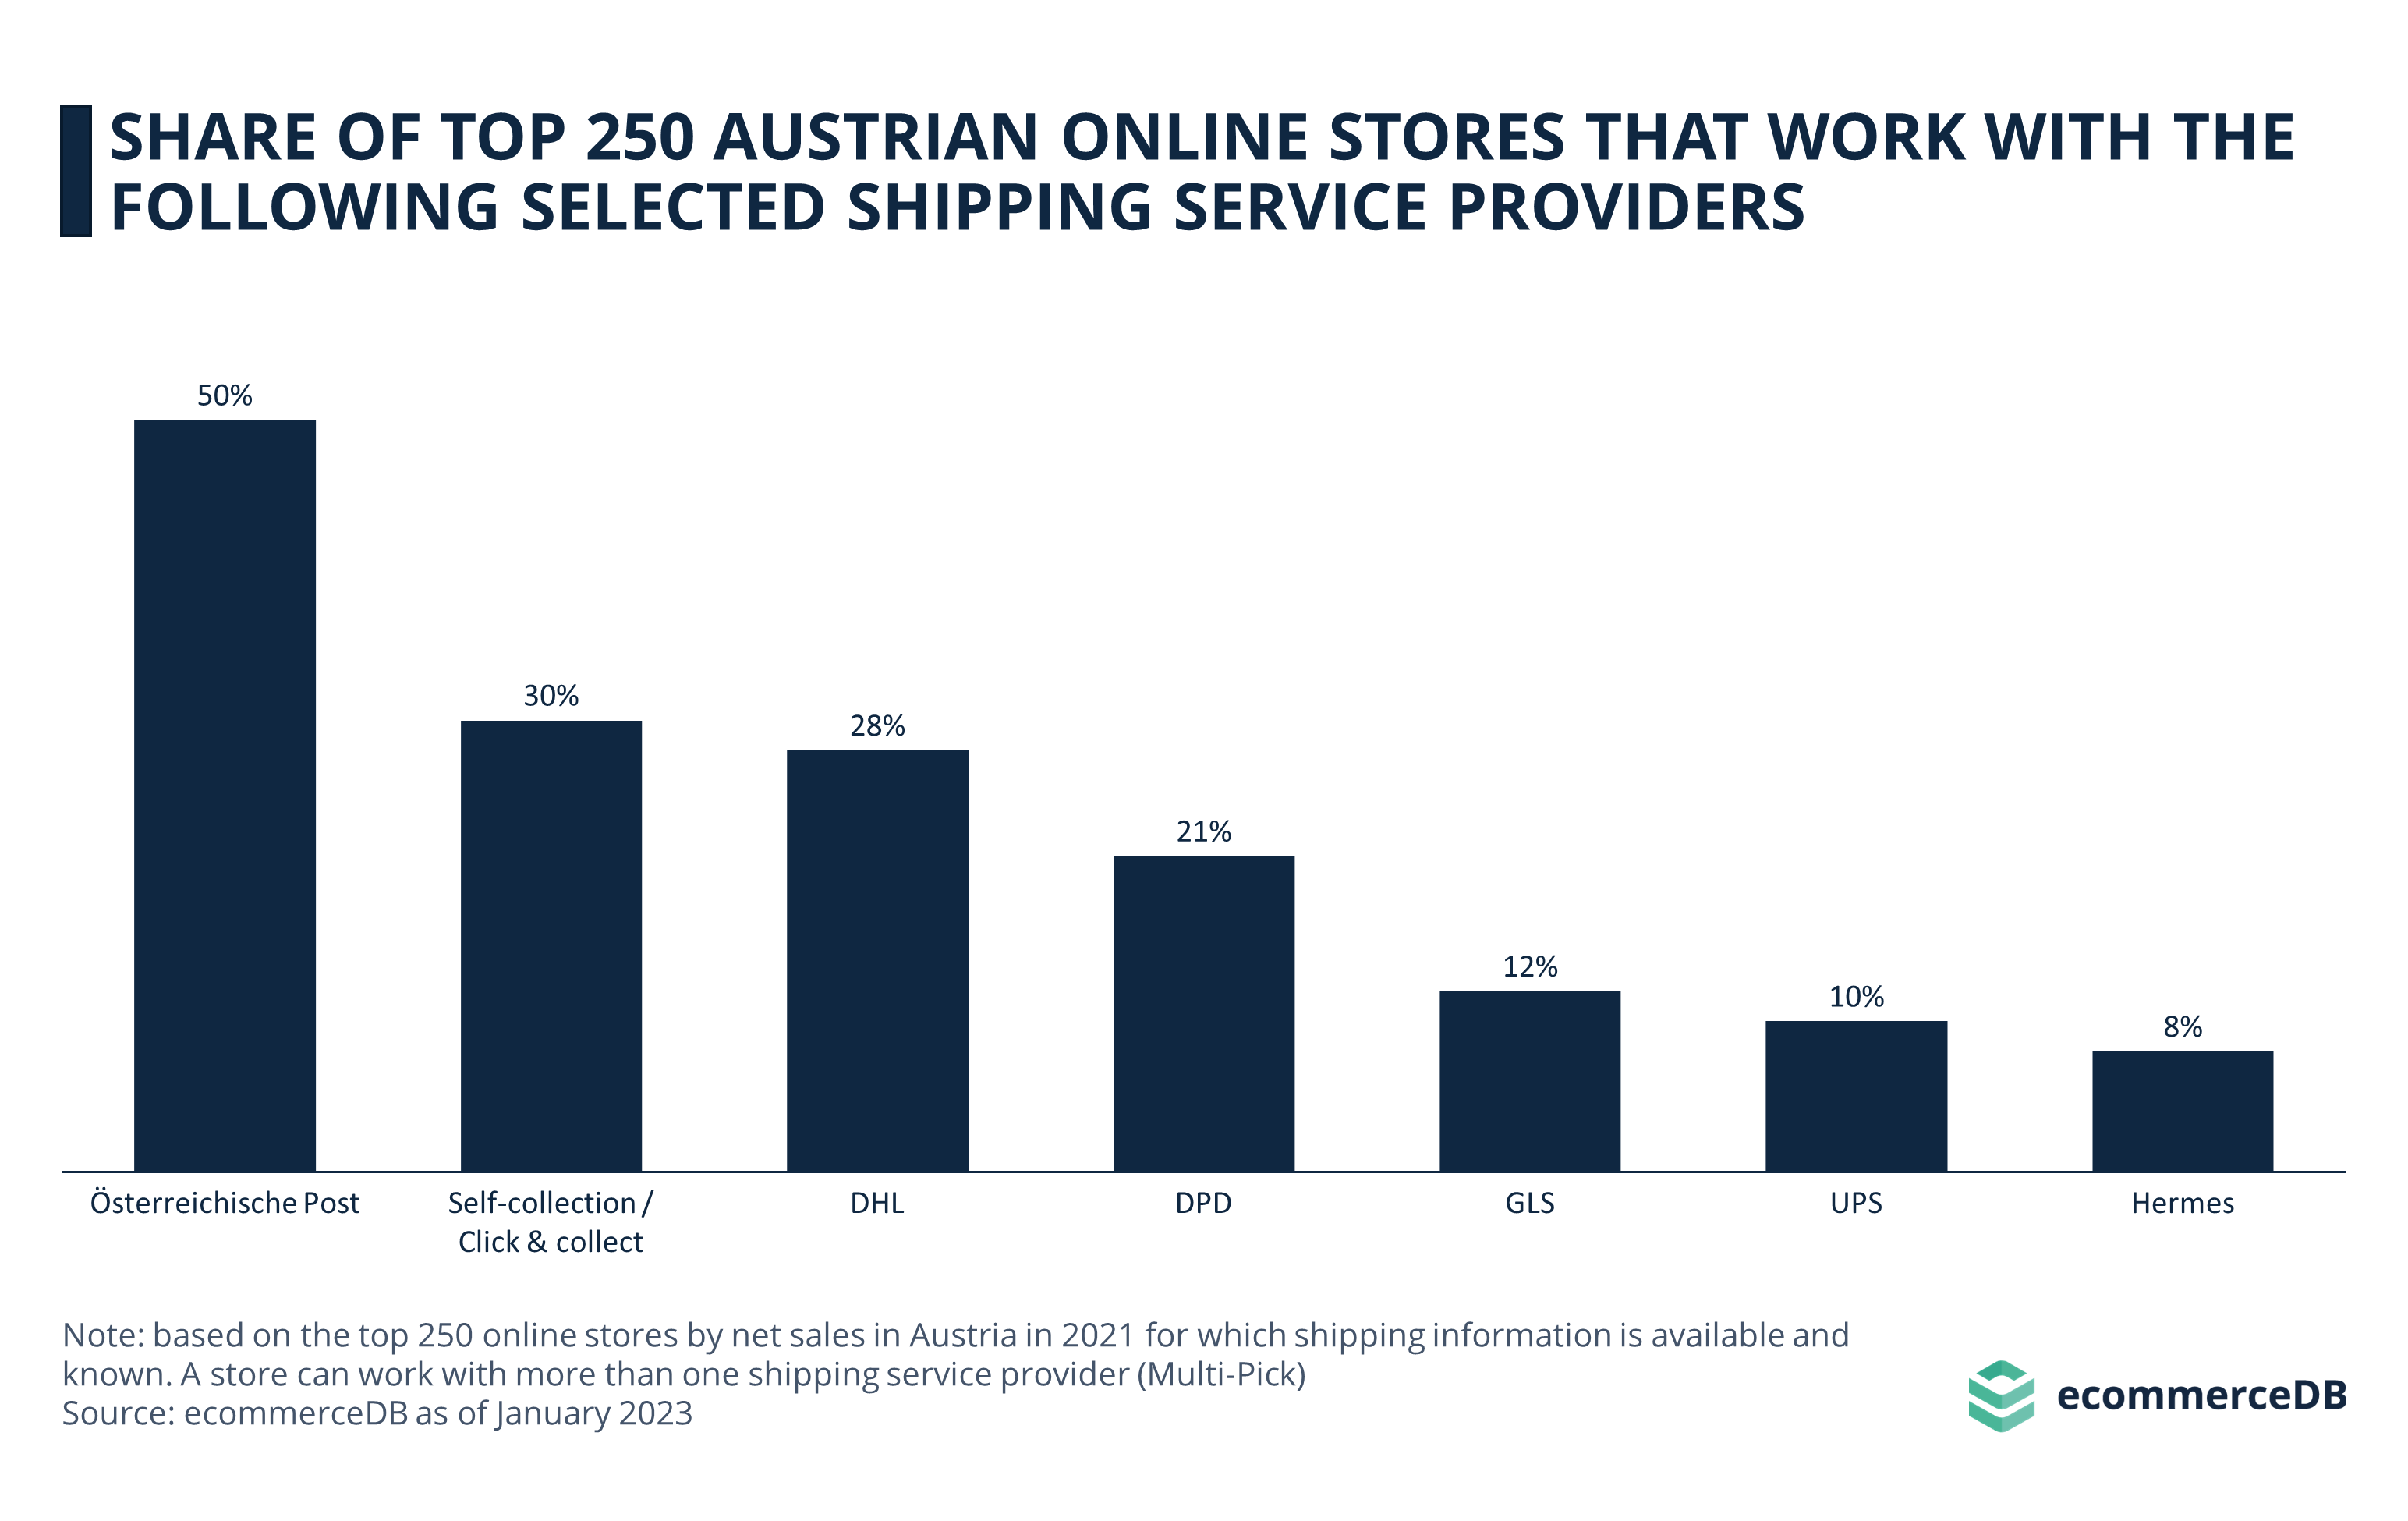 Share of Top 250 Austrian Online Stores That Work With the Following Selected Shipping Service Providers